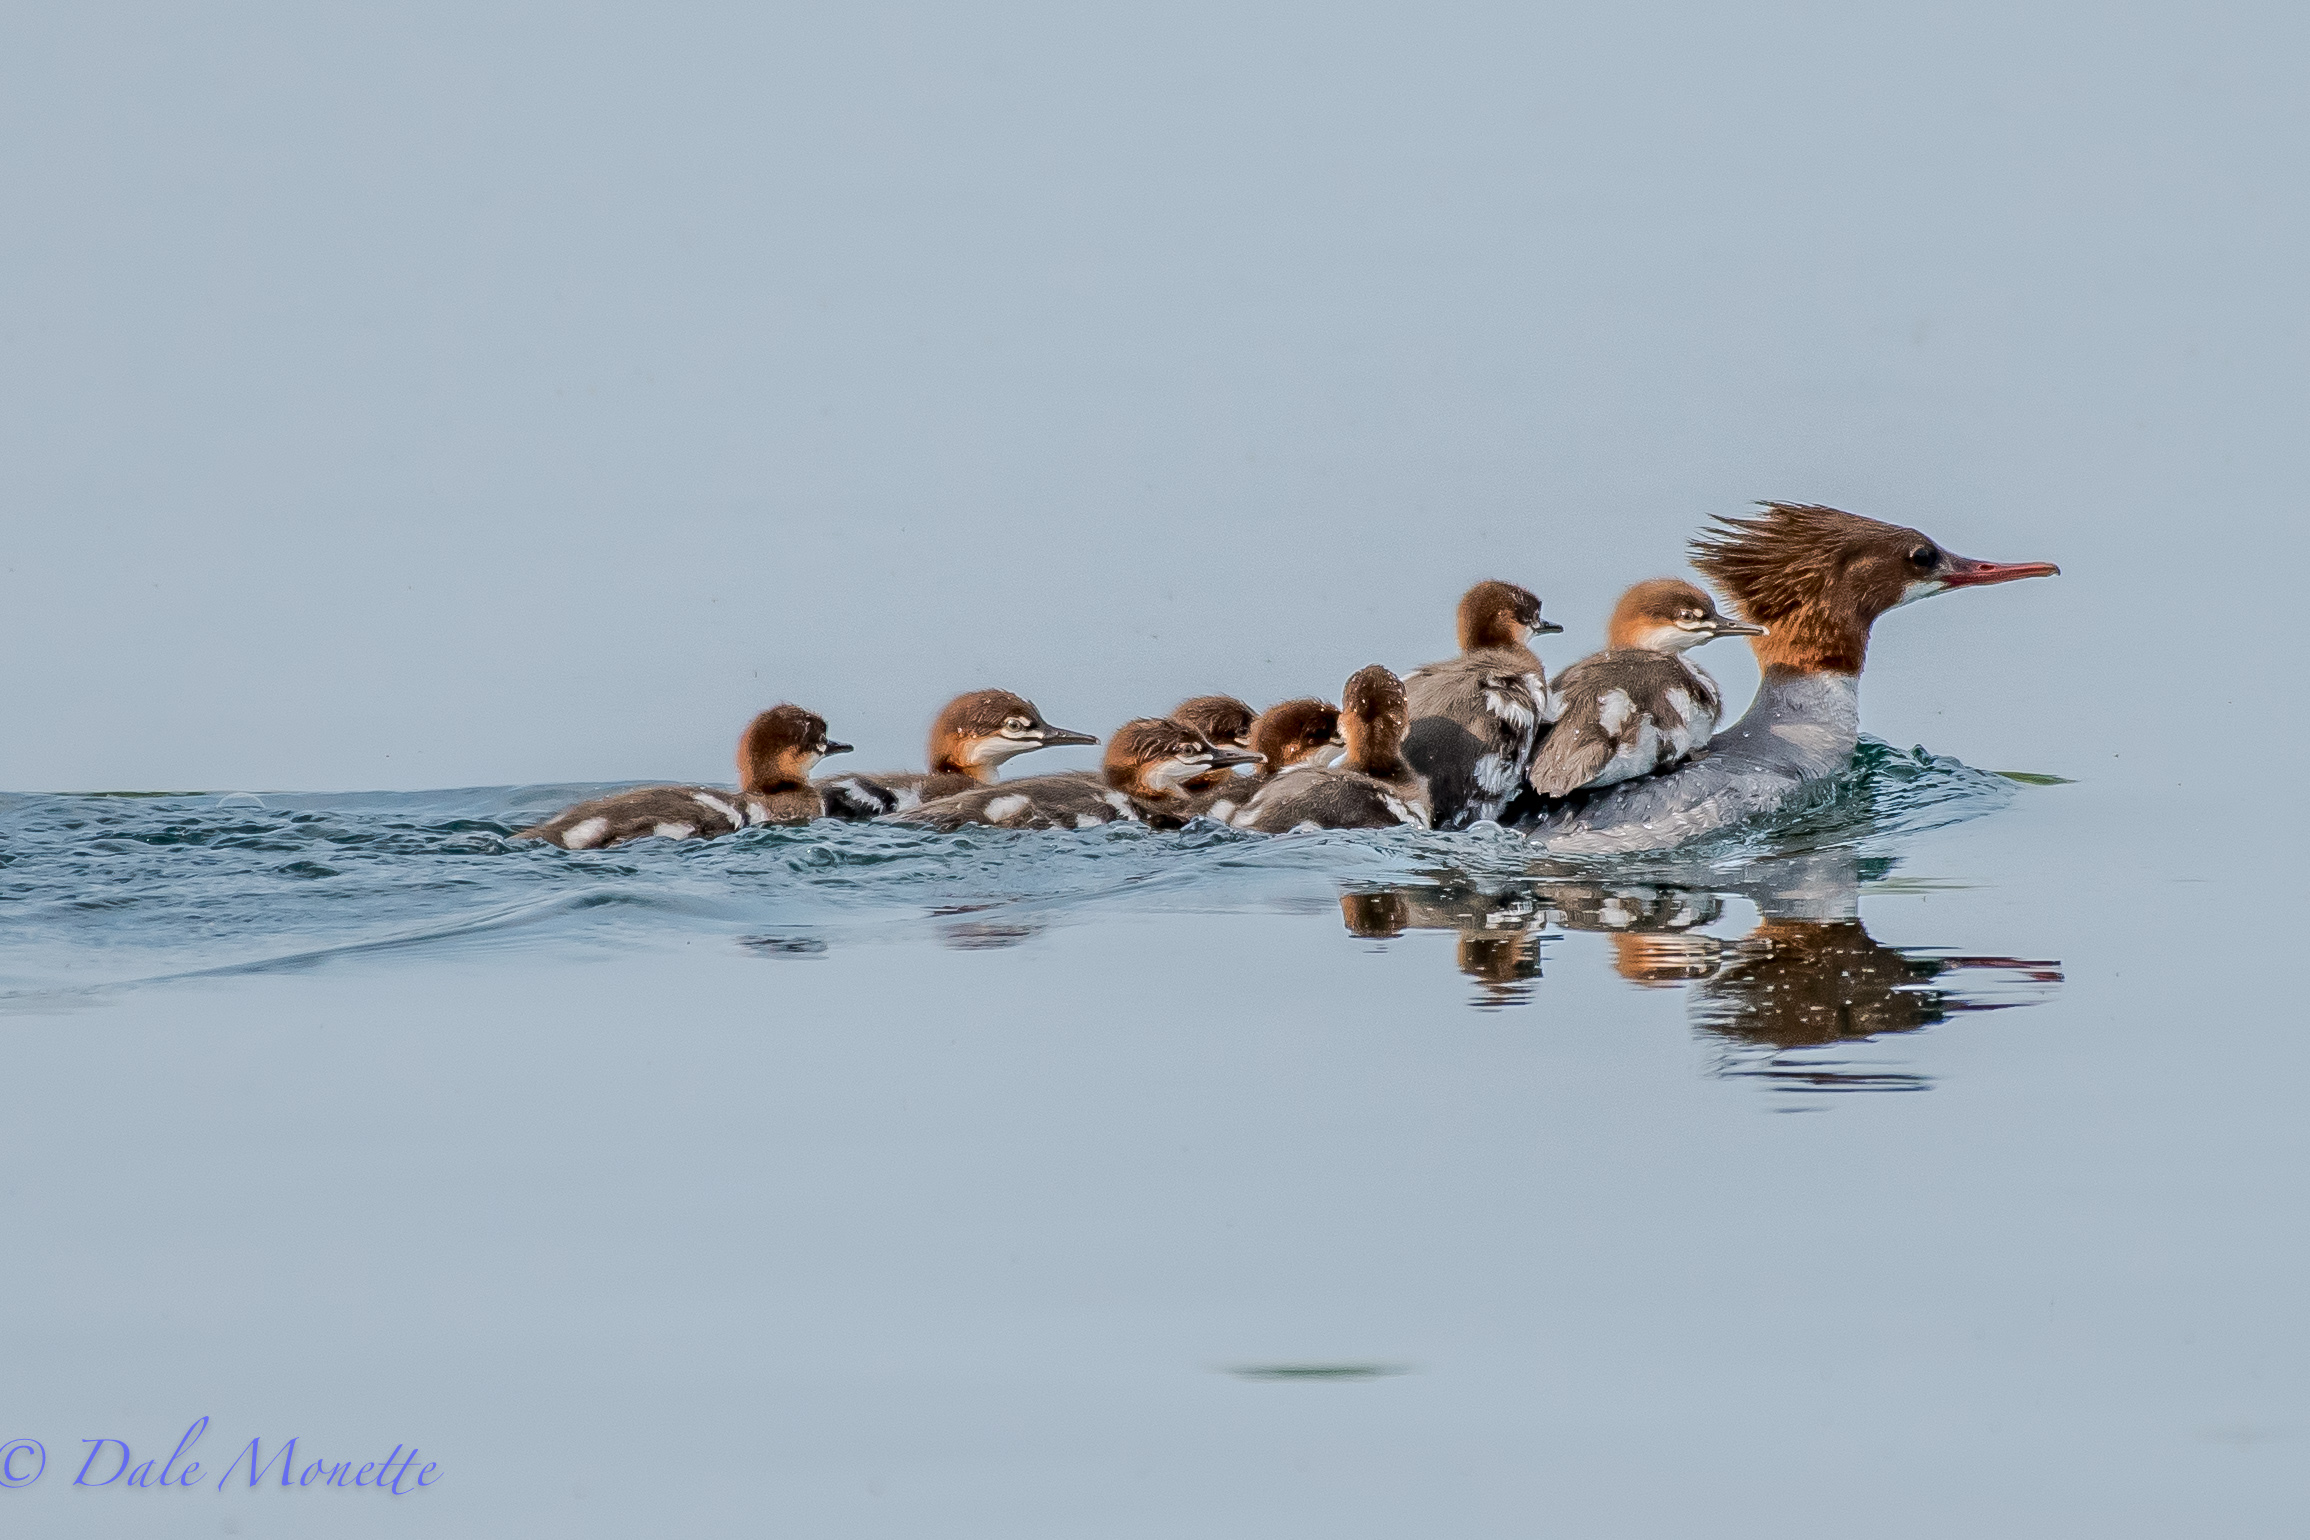   Memorial Day means lots of baby birds starting to appear. &nbsp;Here's a female common merganser with her 9 chicks in tow along the Quabbin shoreline. &nbsp;Nothing as cute as these little buggers ! &nbsp; 5/27/16  